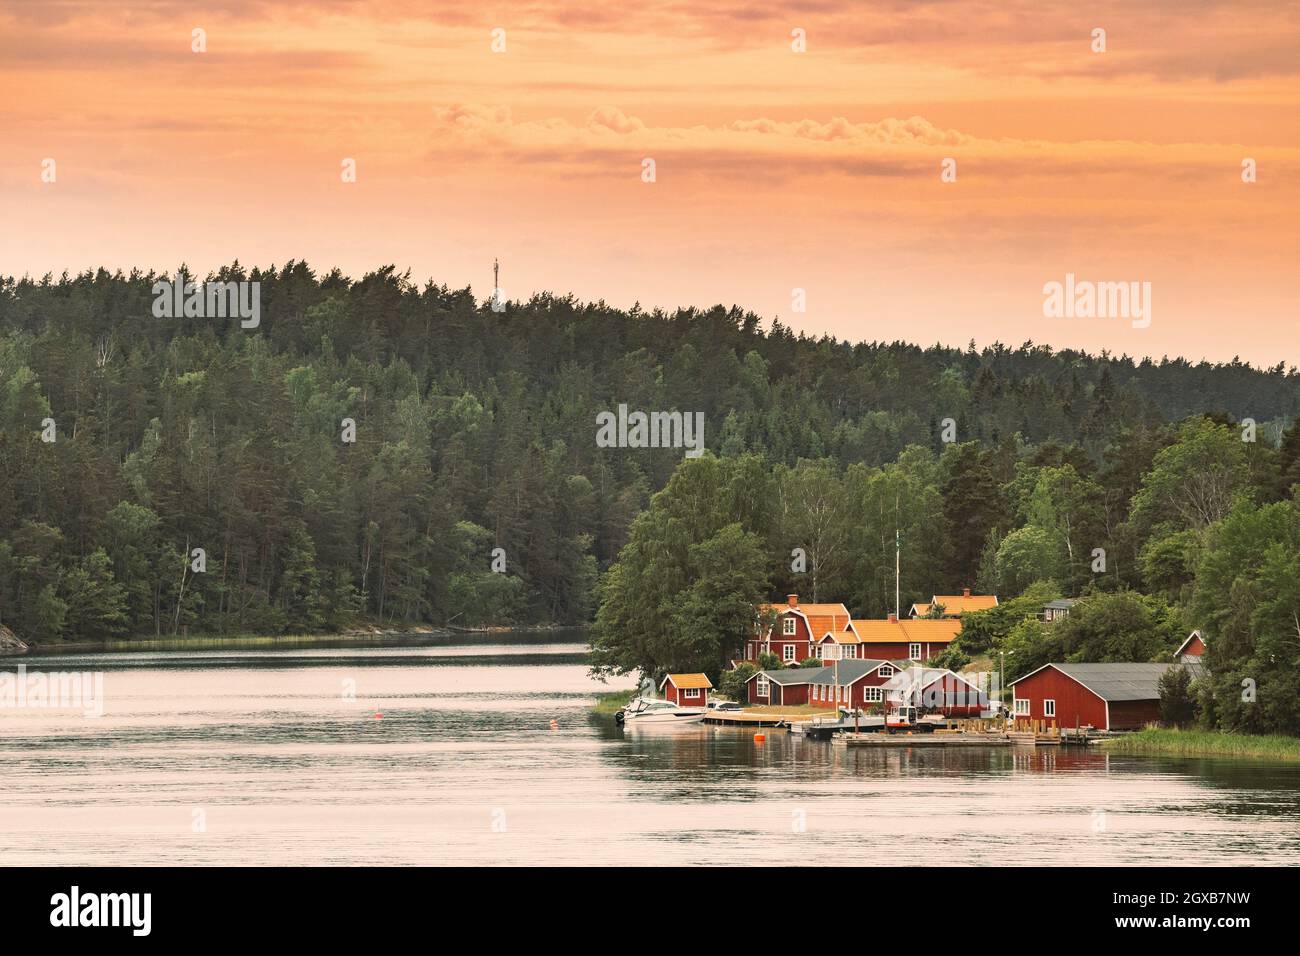 Sweden. Many Beautiful Red Swedish Wooden Log Cabins Houses On Rocky Island Coast. Lake Or River Landscape. Stock Photo